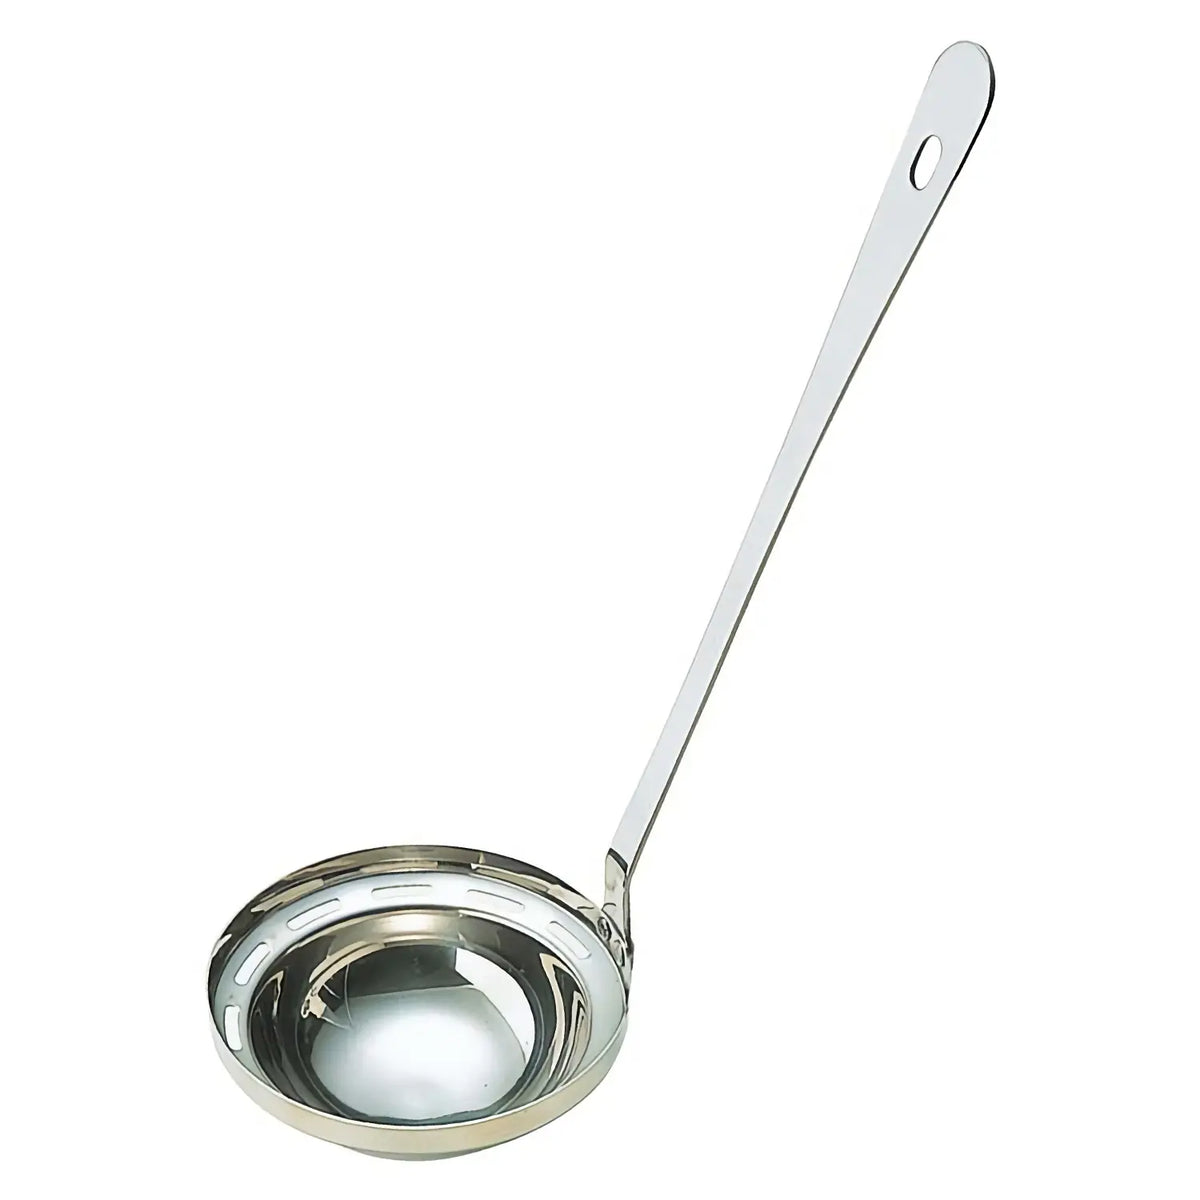 TIGERCROWN Stainless Steel Ladle with Scale